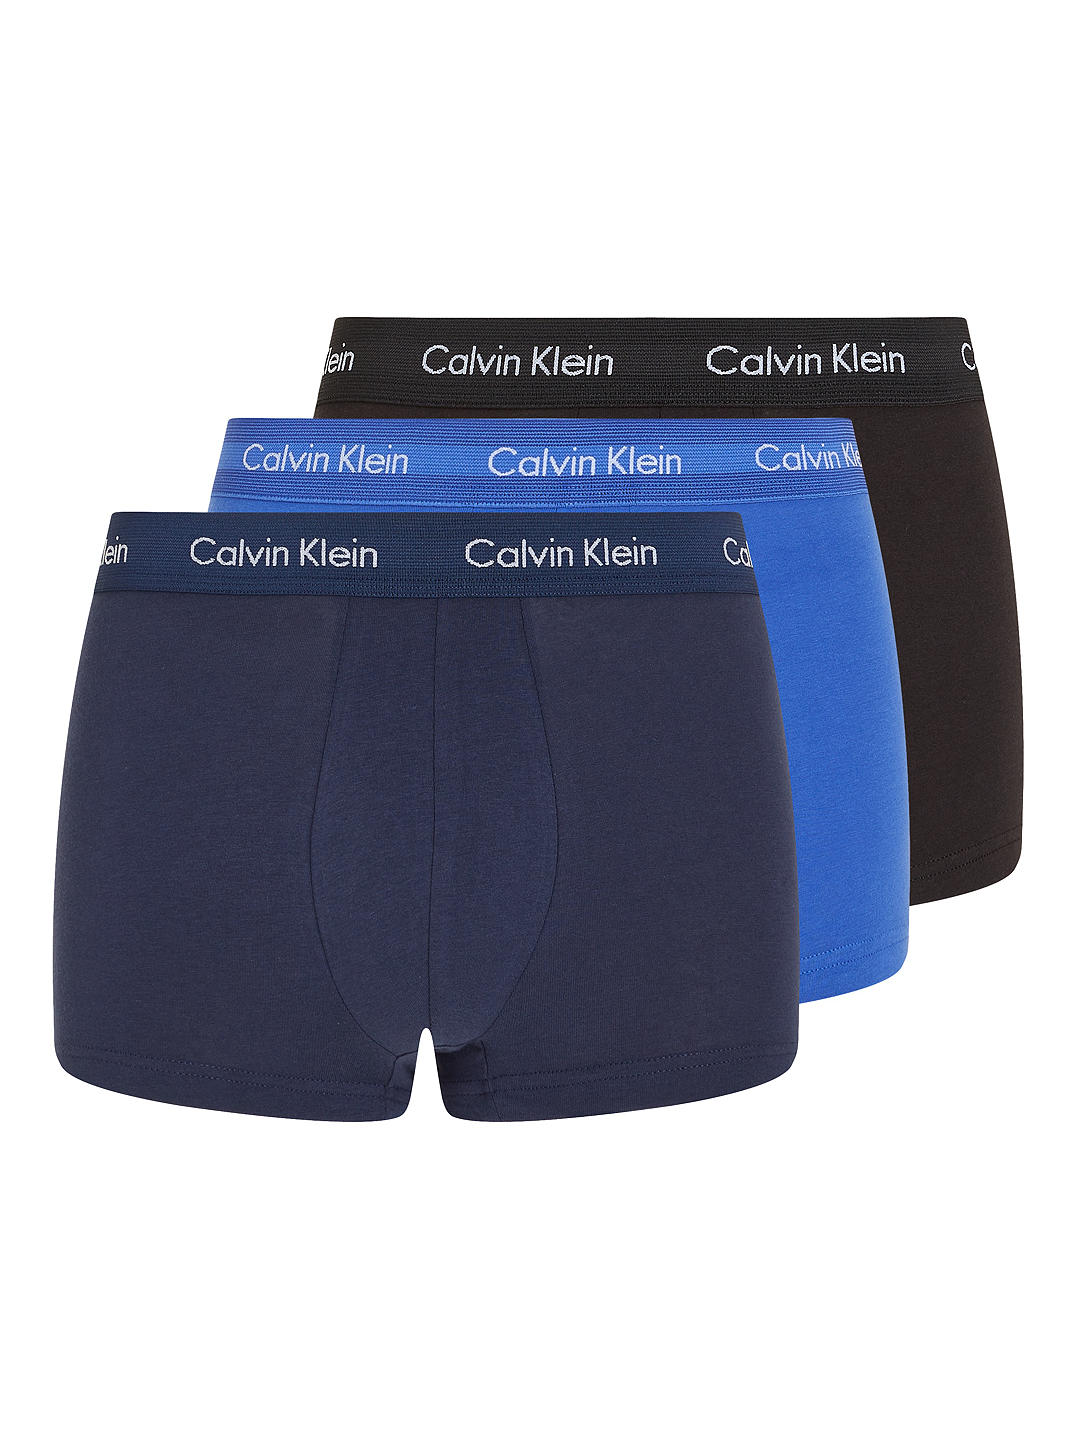 Calvin Klein Low Rise Cotton Stretch Trunks, Pack of 3, Black/Blue Shadow/Cobalt Water